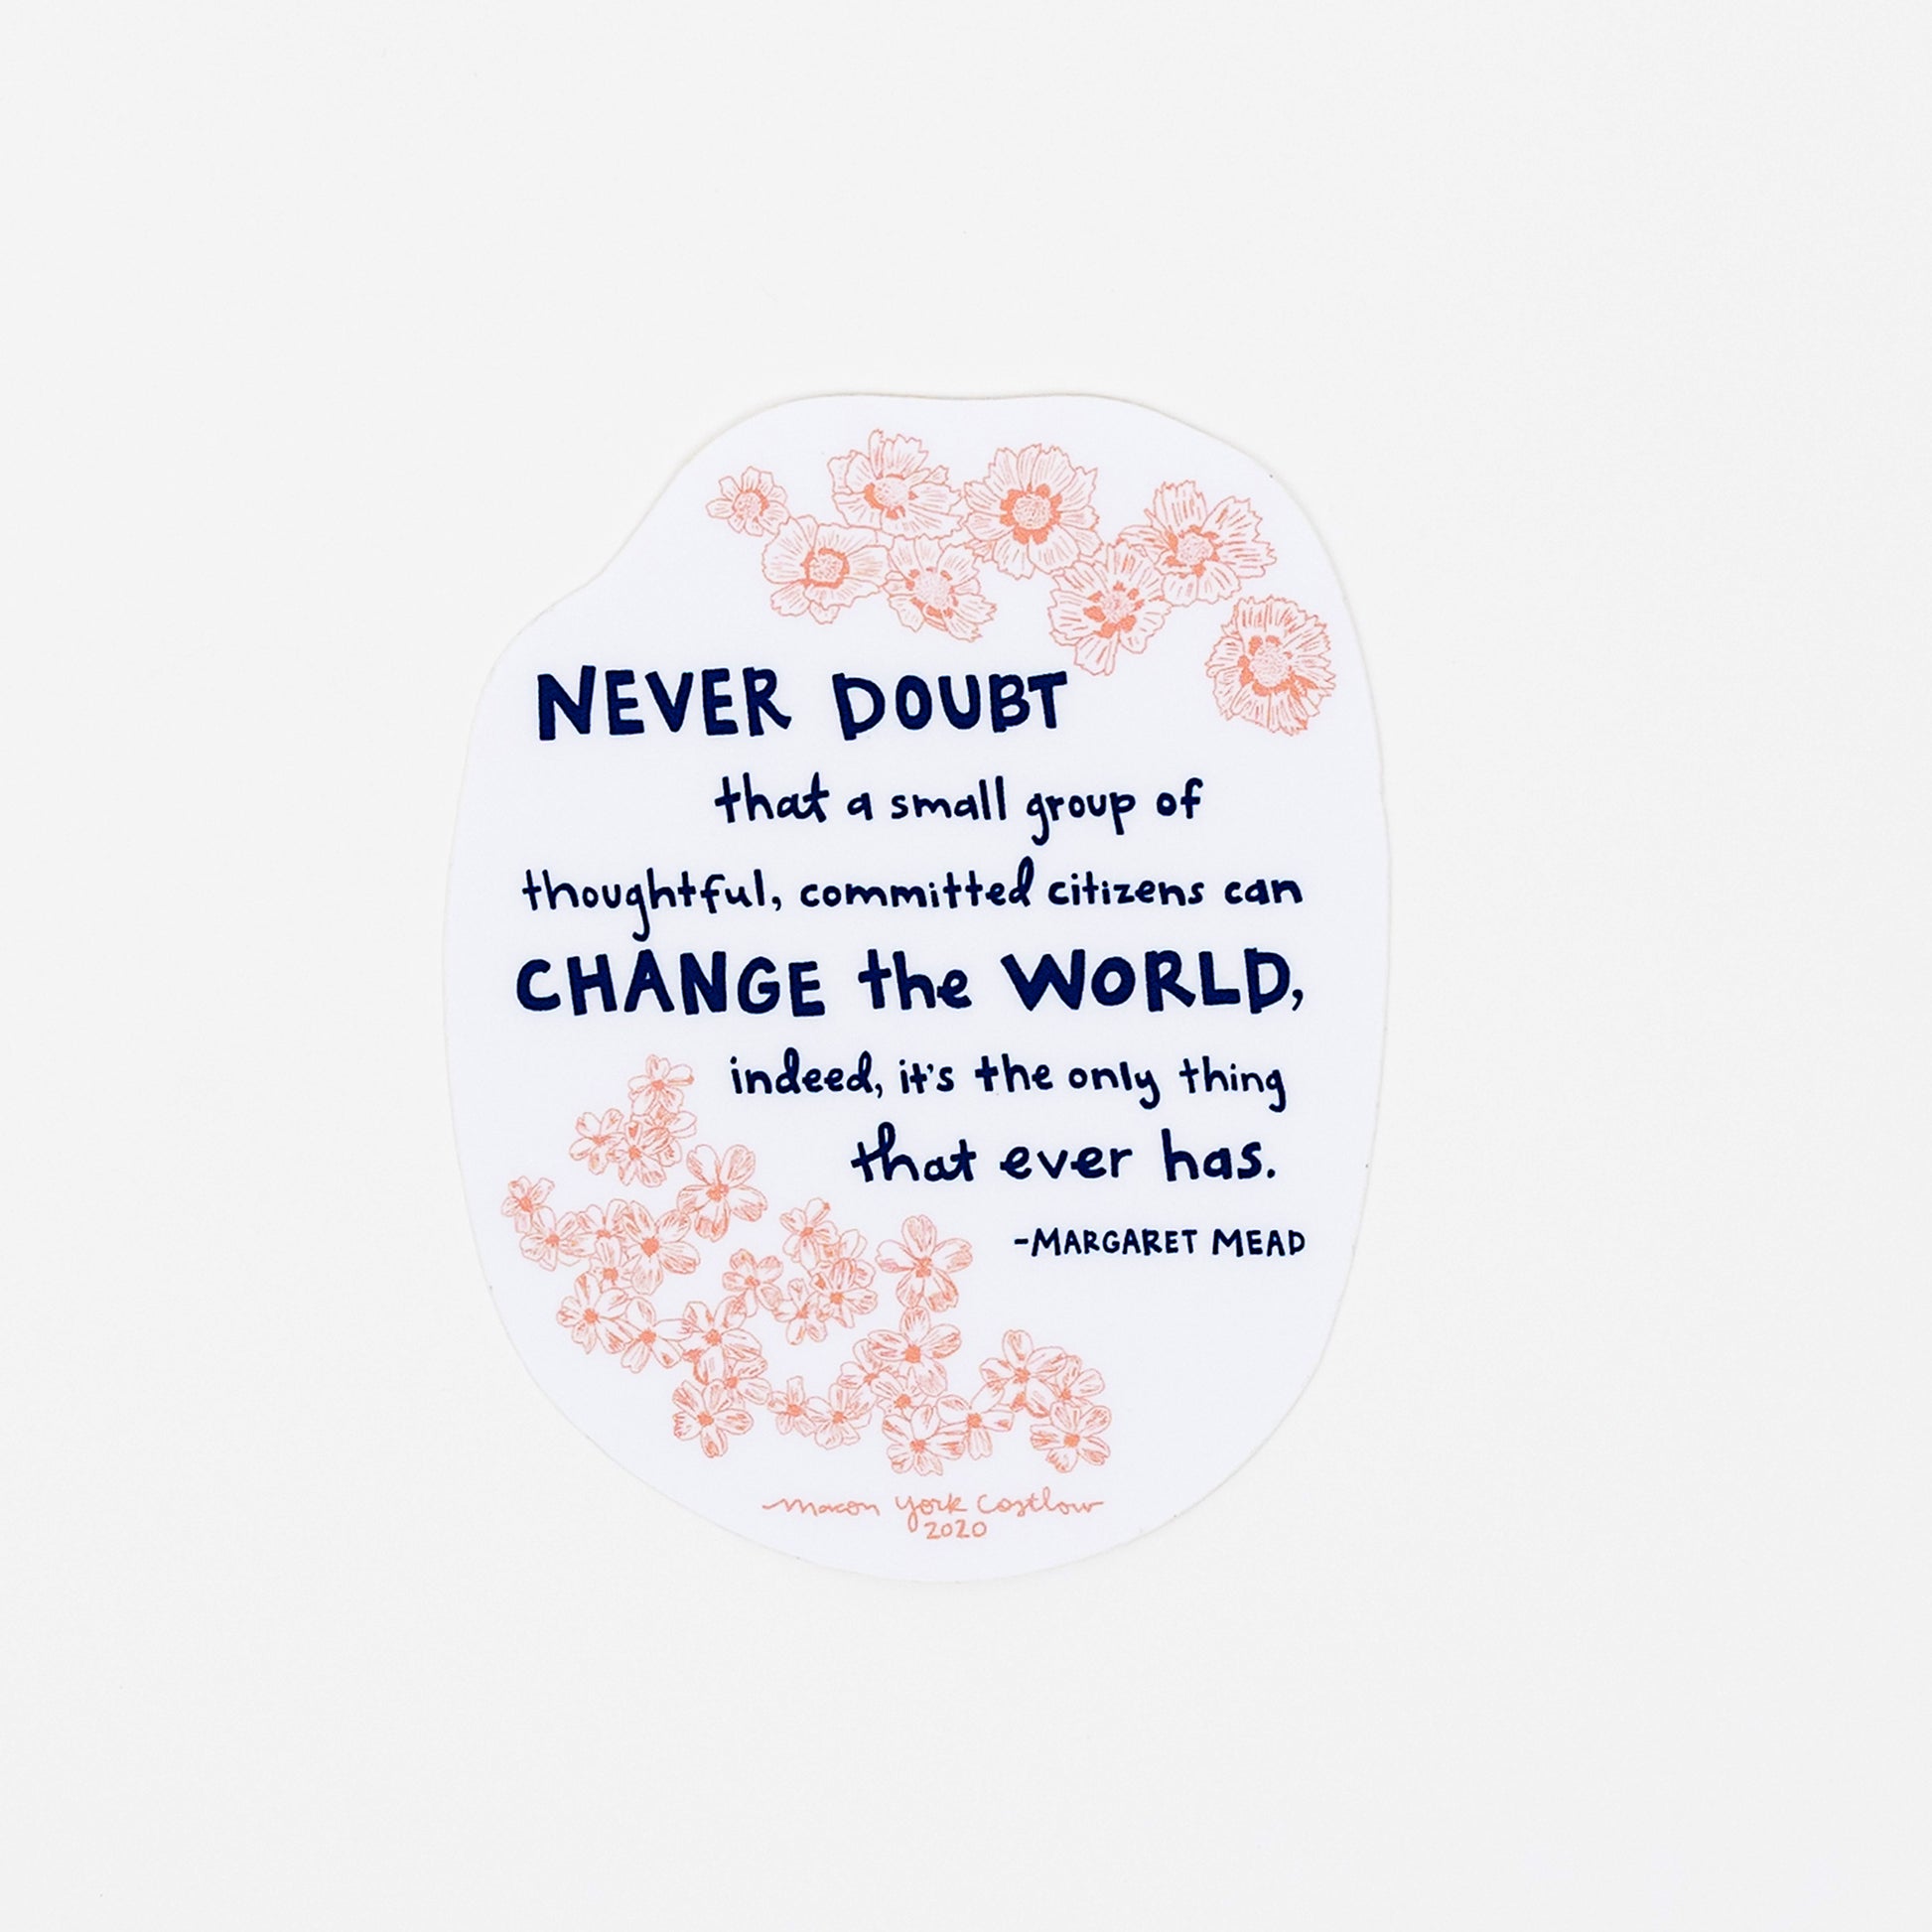 This vinyl sticker features original text by Margaret Mead, hand-drawn in a funky folk-art style of Macon York: "Never doubt that a small group of thoughtful, committed citizens can change the world, indeed, it's the only thing that ever has." Hand-drawn coreopsis and phlox in cheerful coral ink and hand-lettered text in navy. 